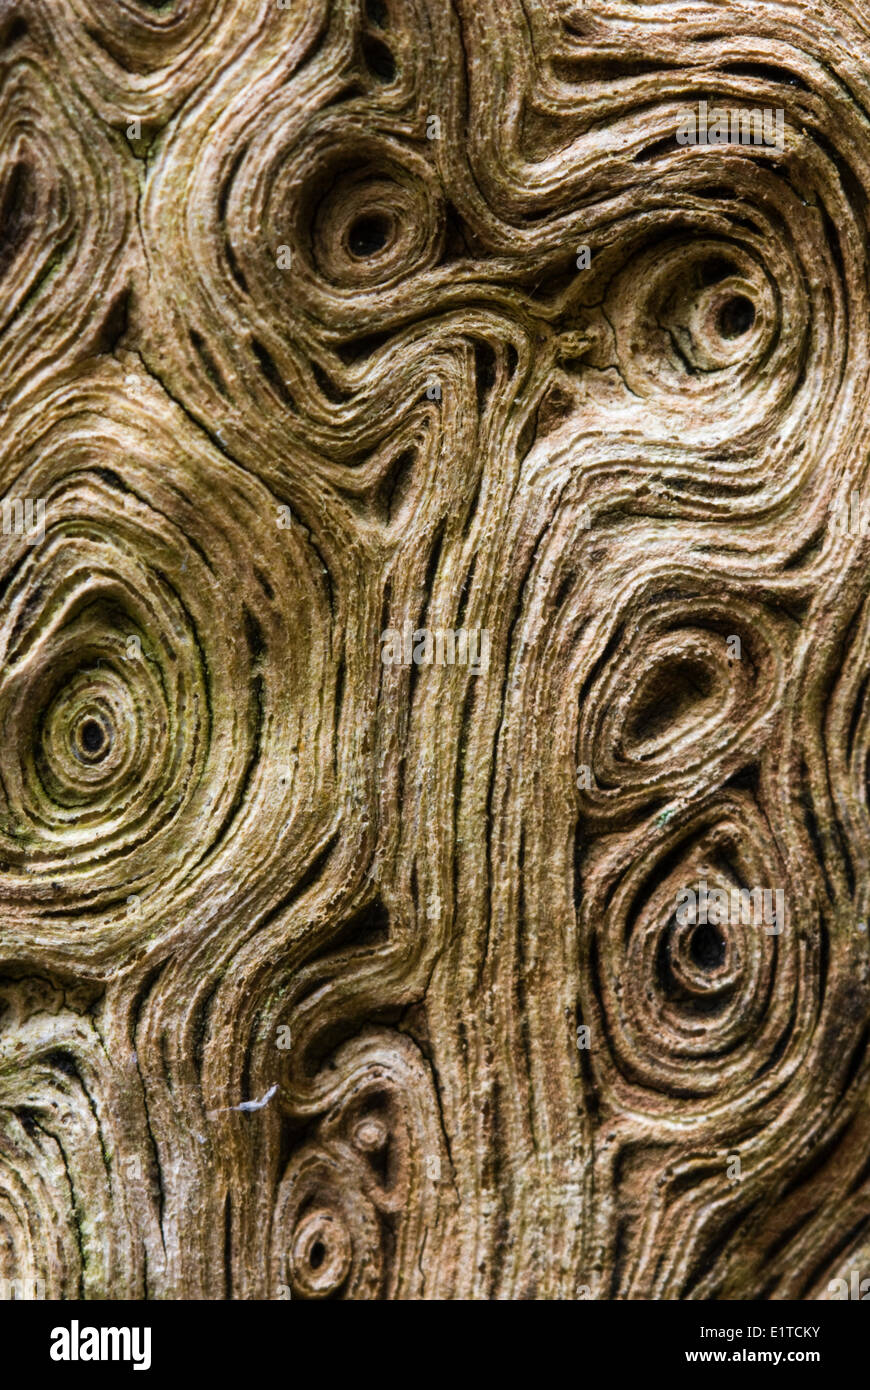 close-up detail of centuries old oak named after wodan Stock Photo